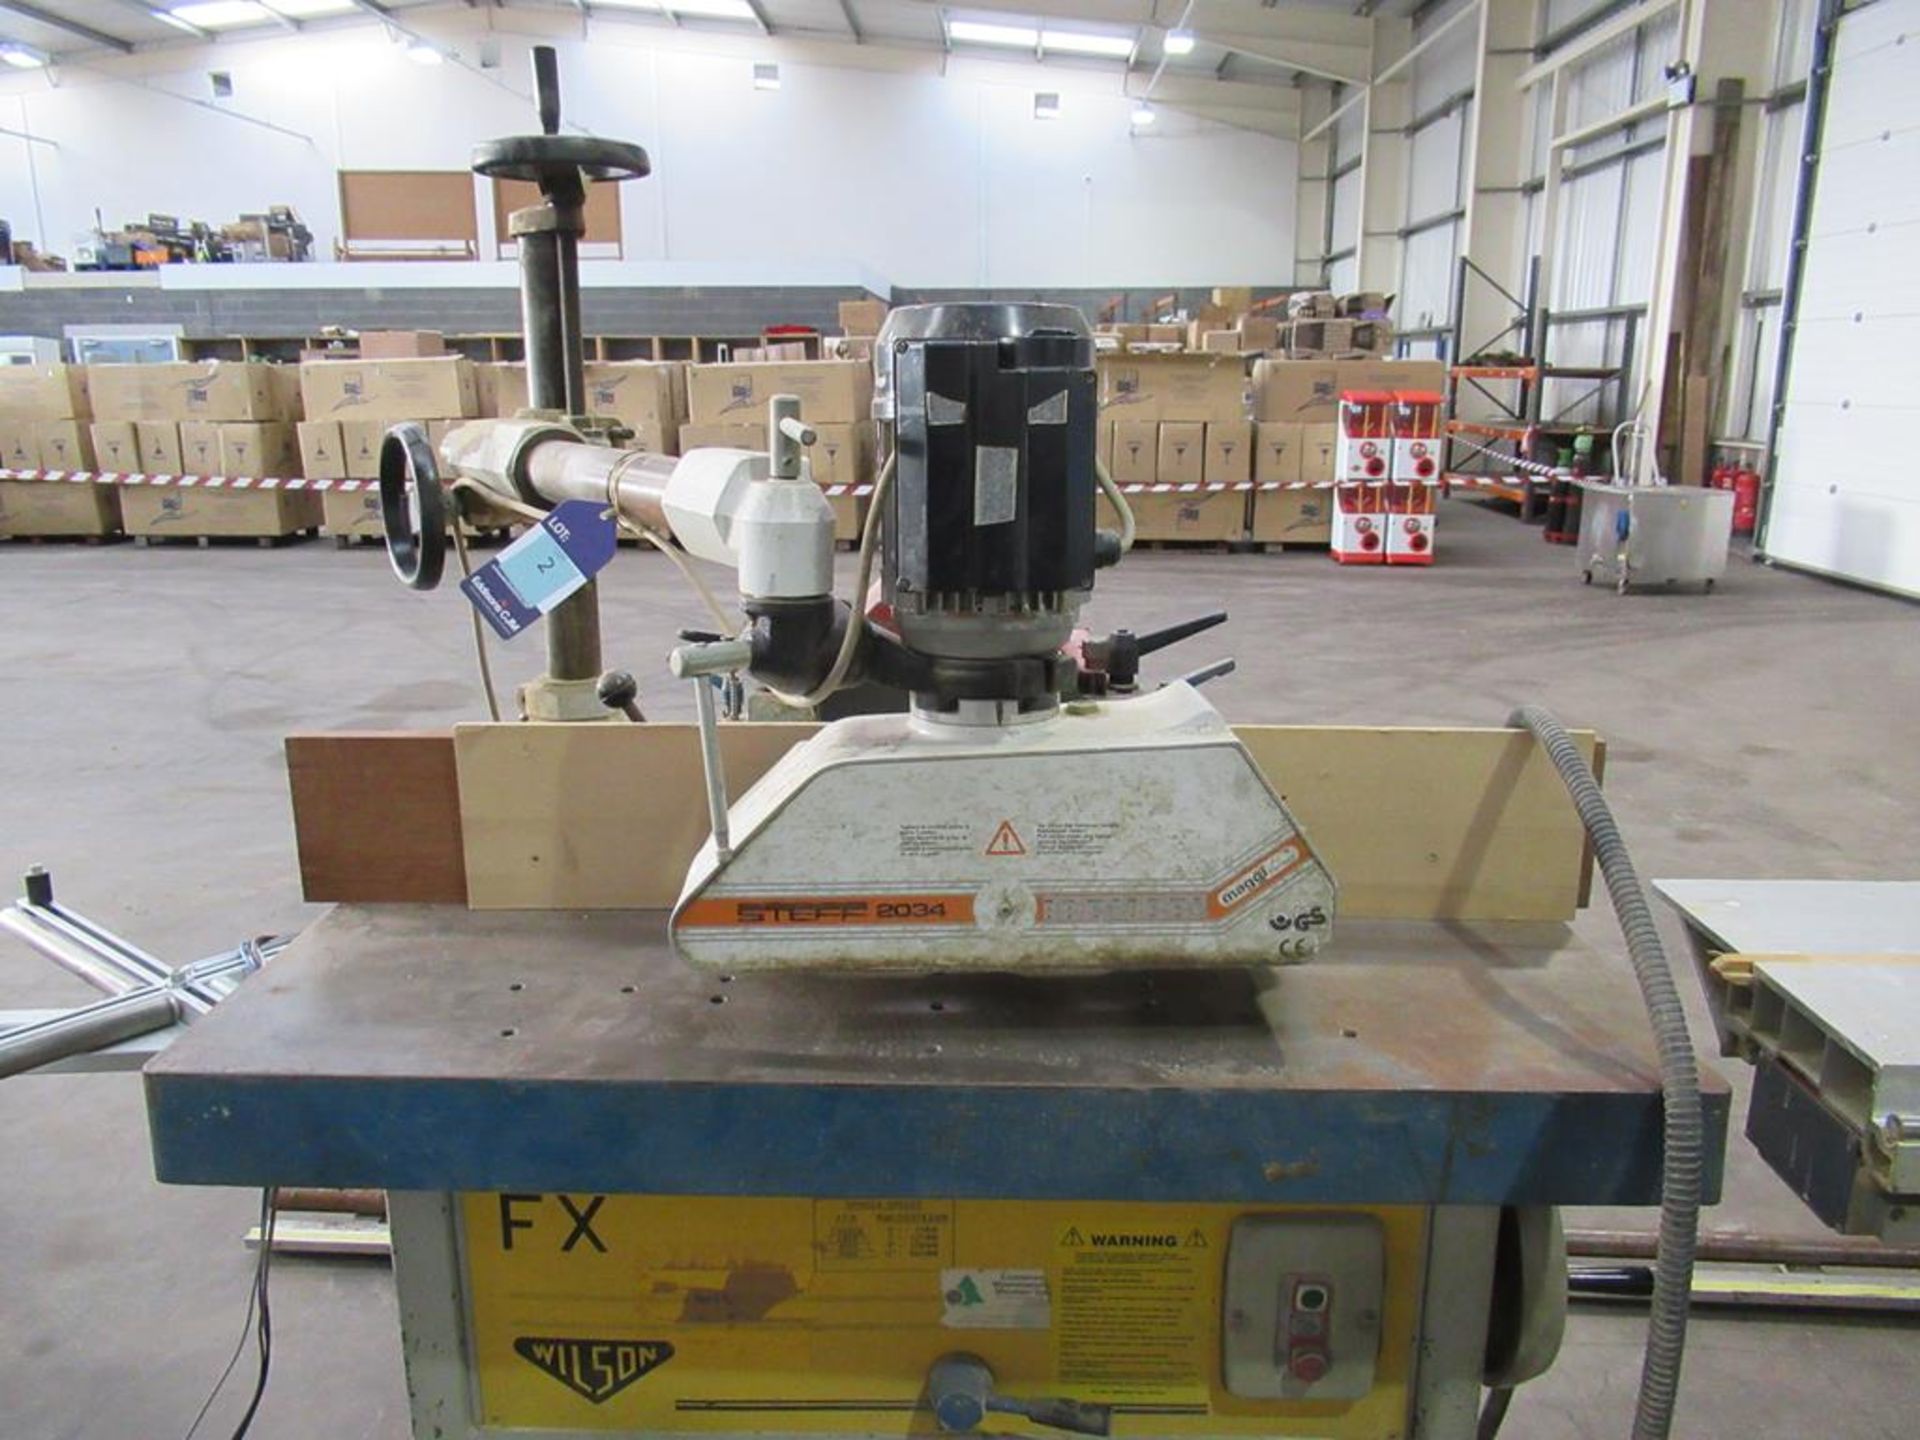 Wilson FX Spindle Moulder with Maggi Steff 2034 Power Feed - Image 2 of 8